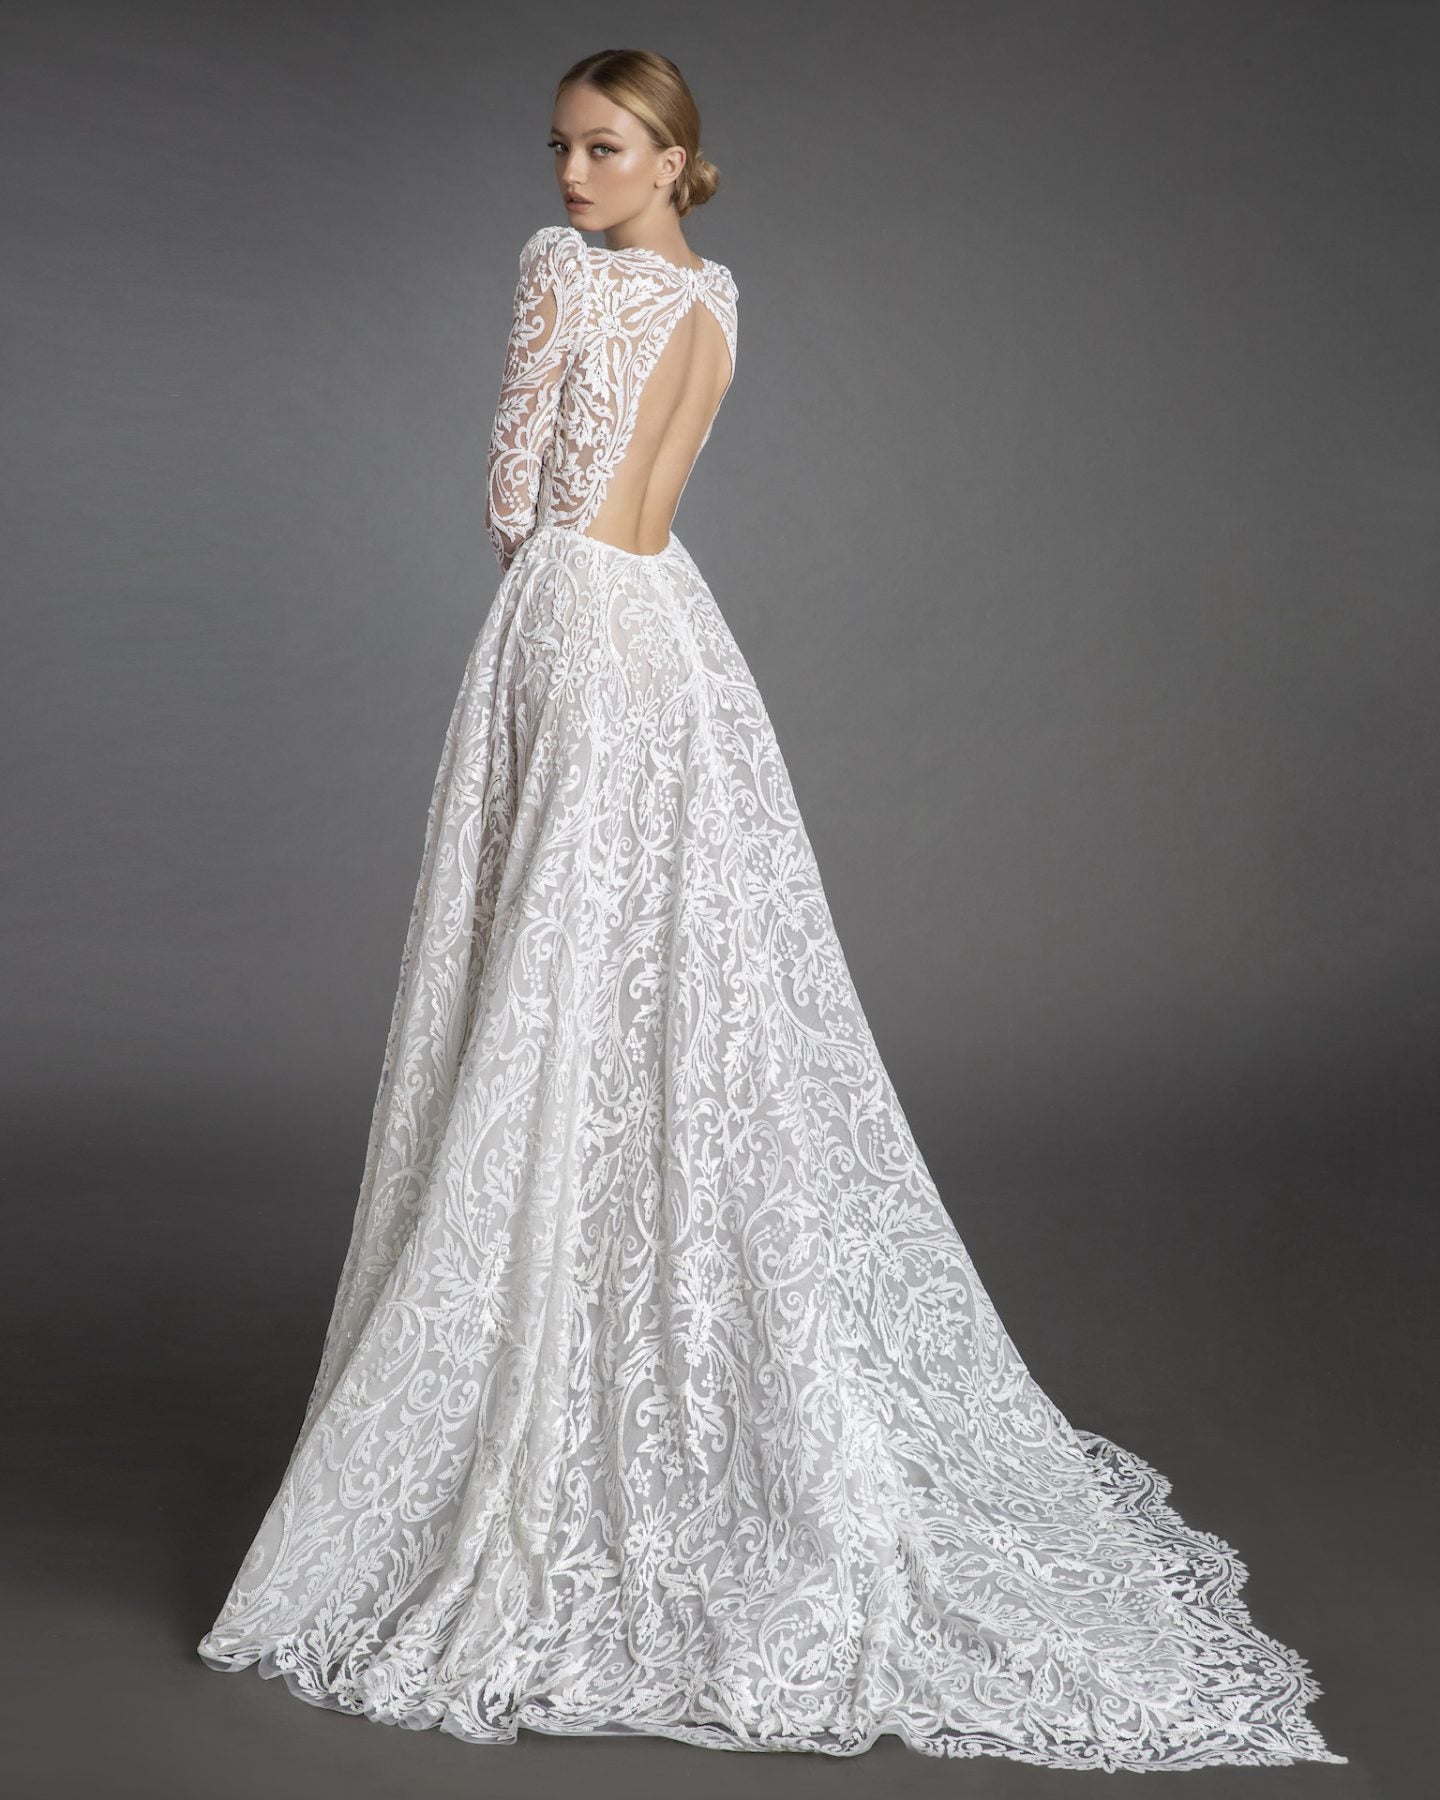 All Over Lace Long Sleeve A-line Wedding Dress With Puff Sleeves ...